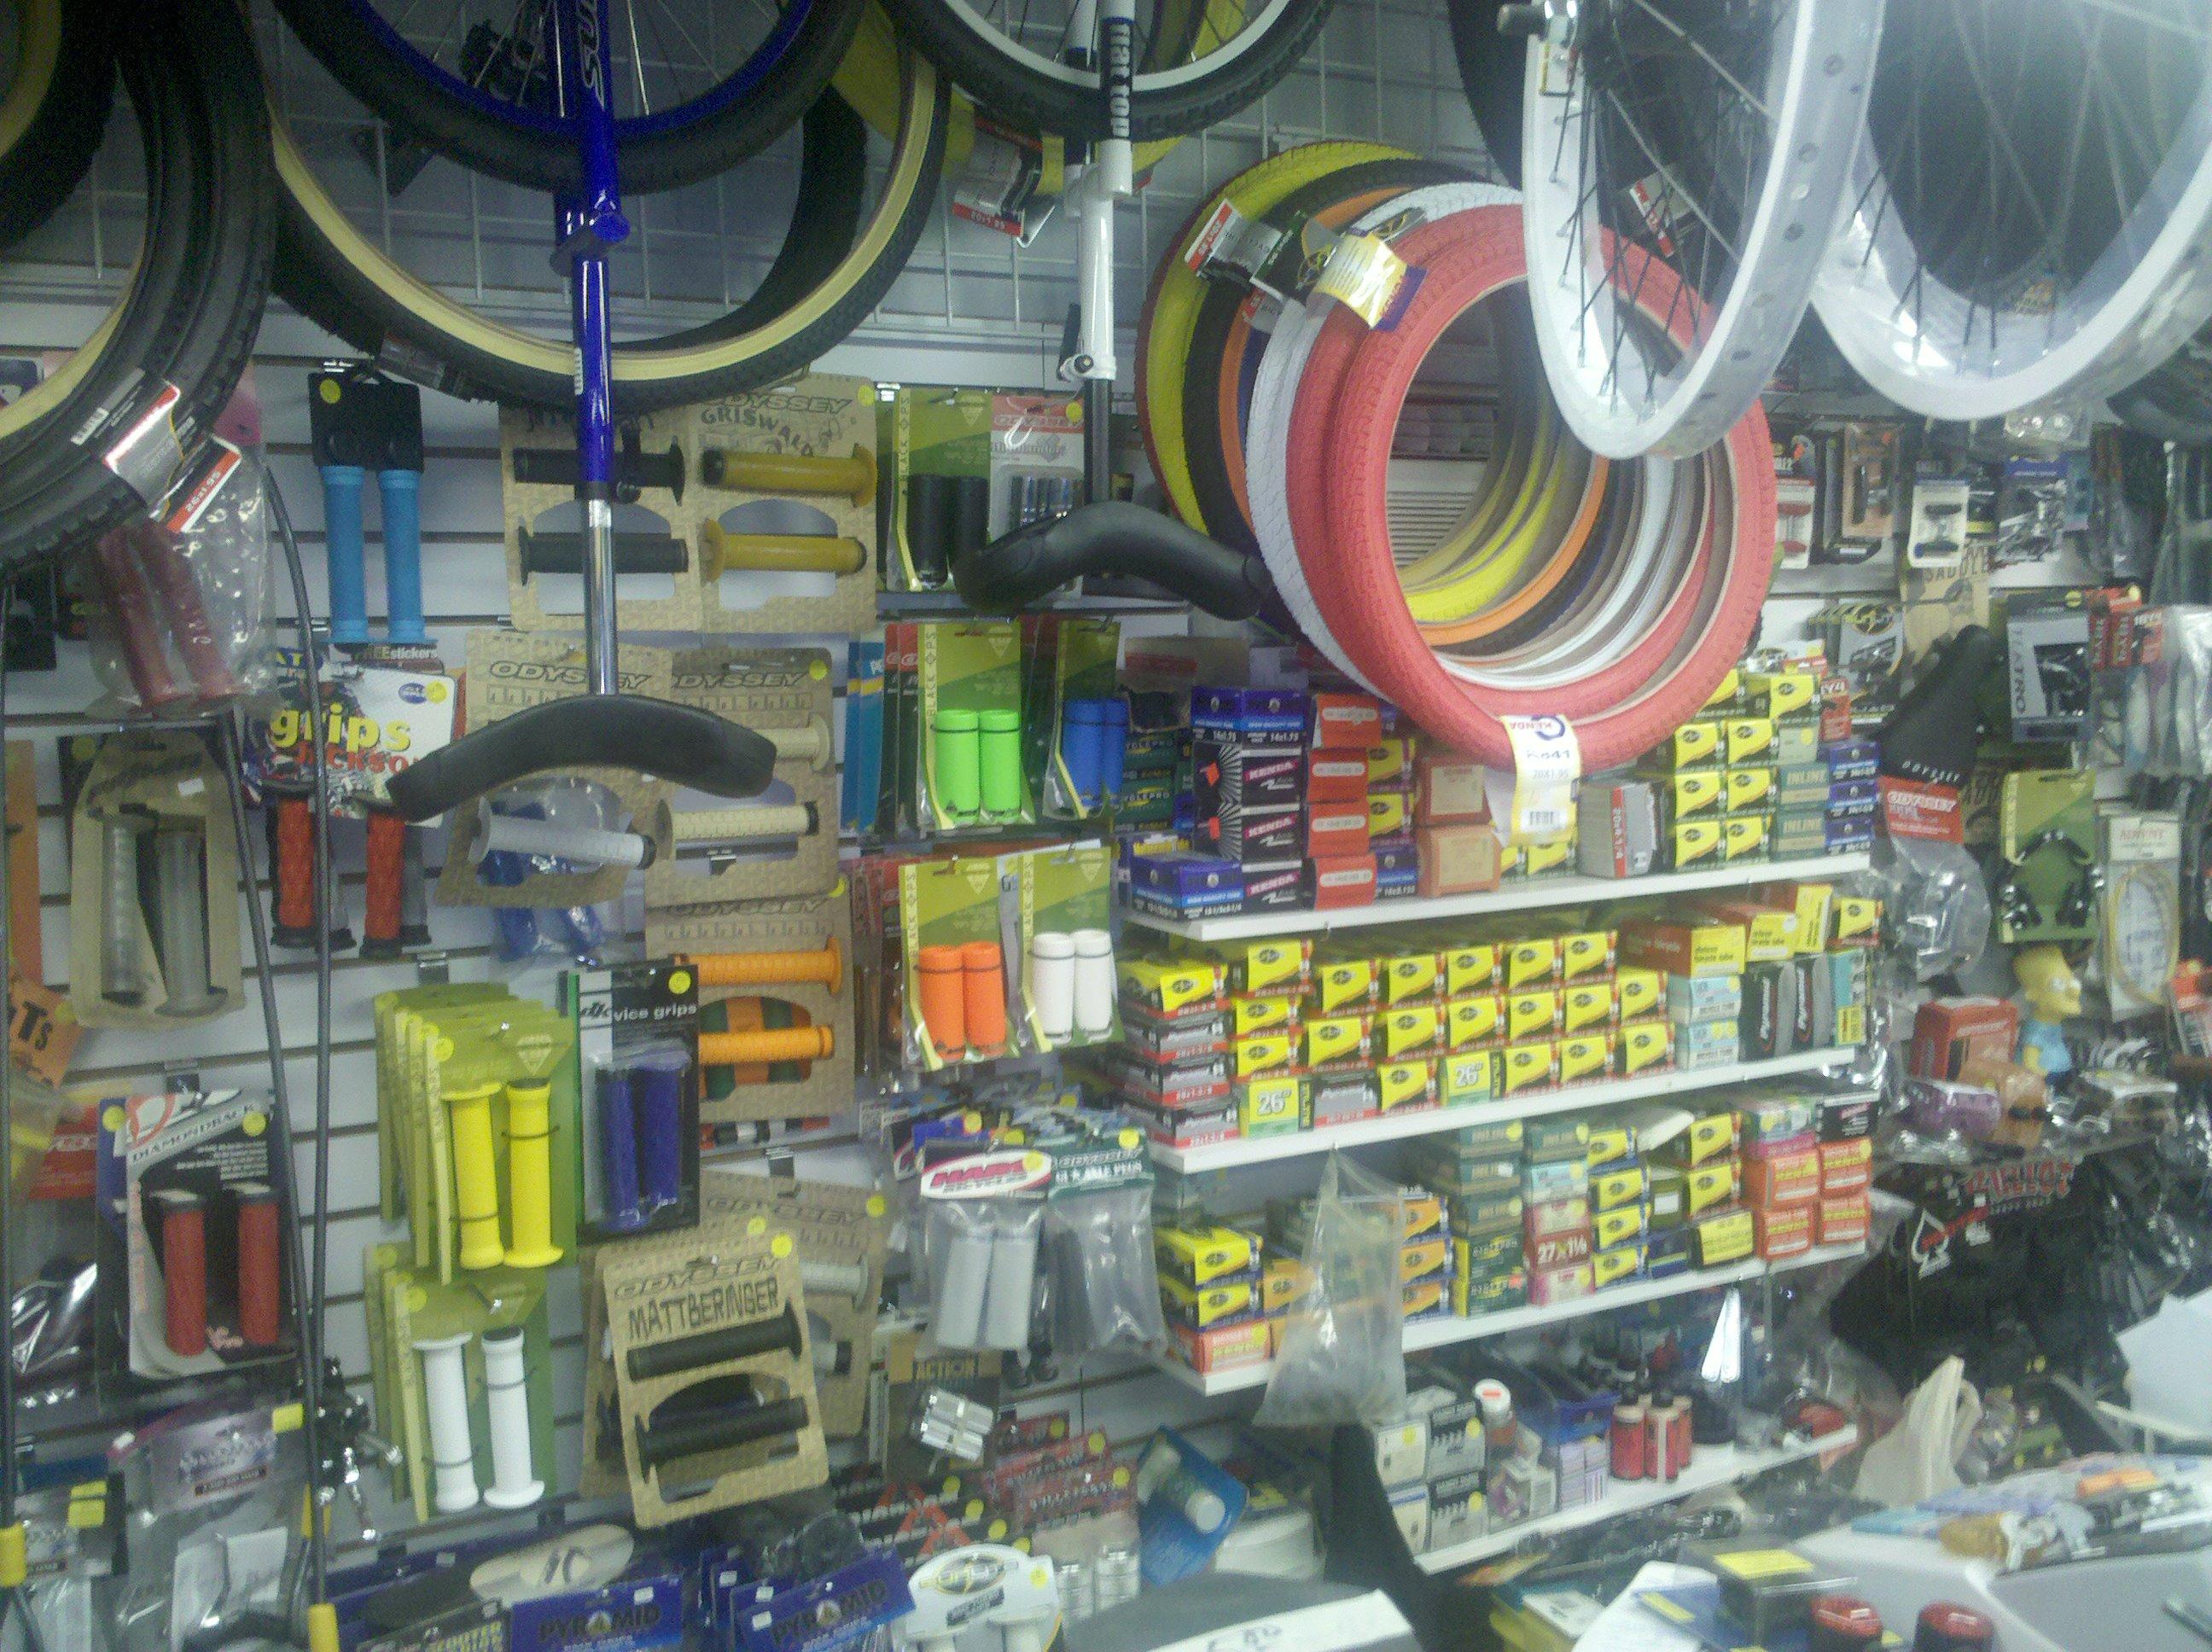 Pauls Bicycle Shop bike parts for sale, bicycle repair, rentals, classic and antique bicycles, skateboards,gifts,crafts, craft supplies, Easter flowers, wreaths